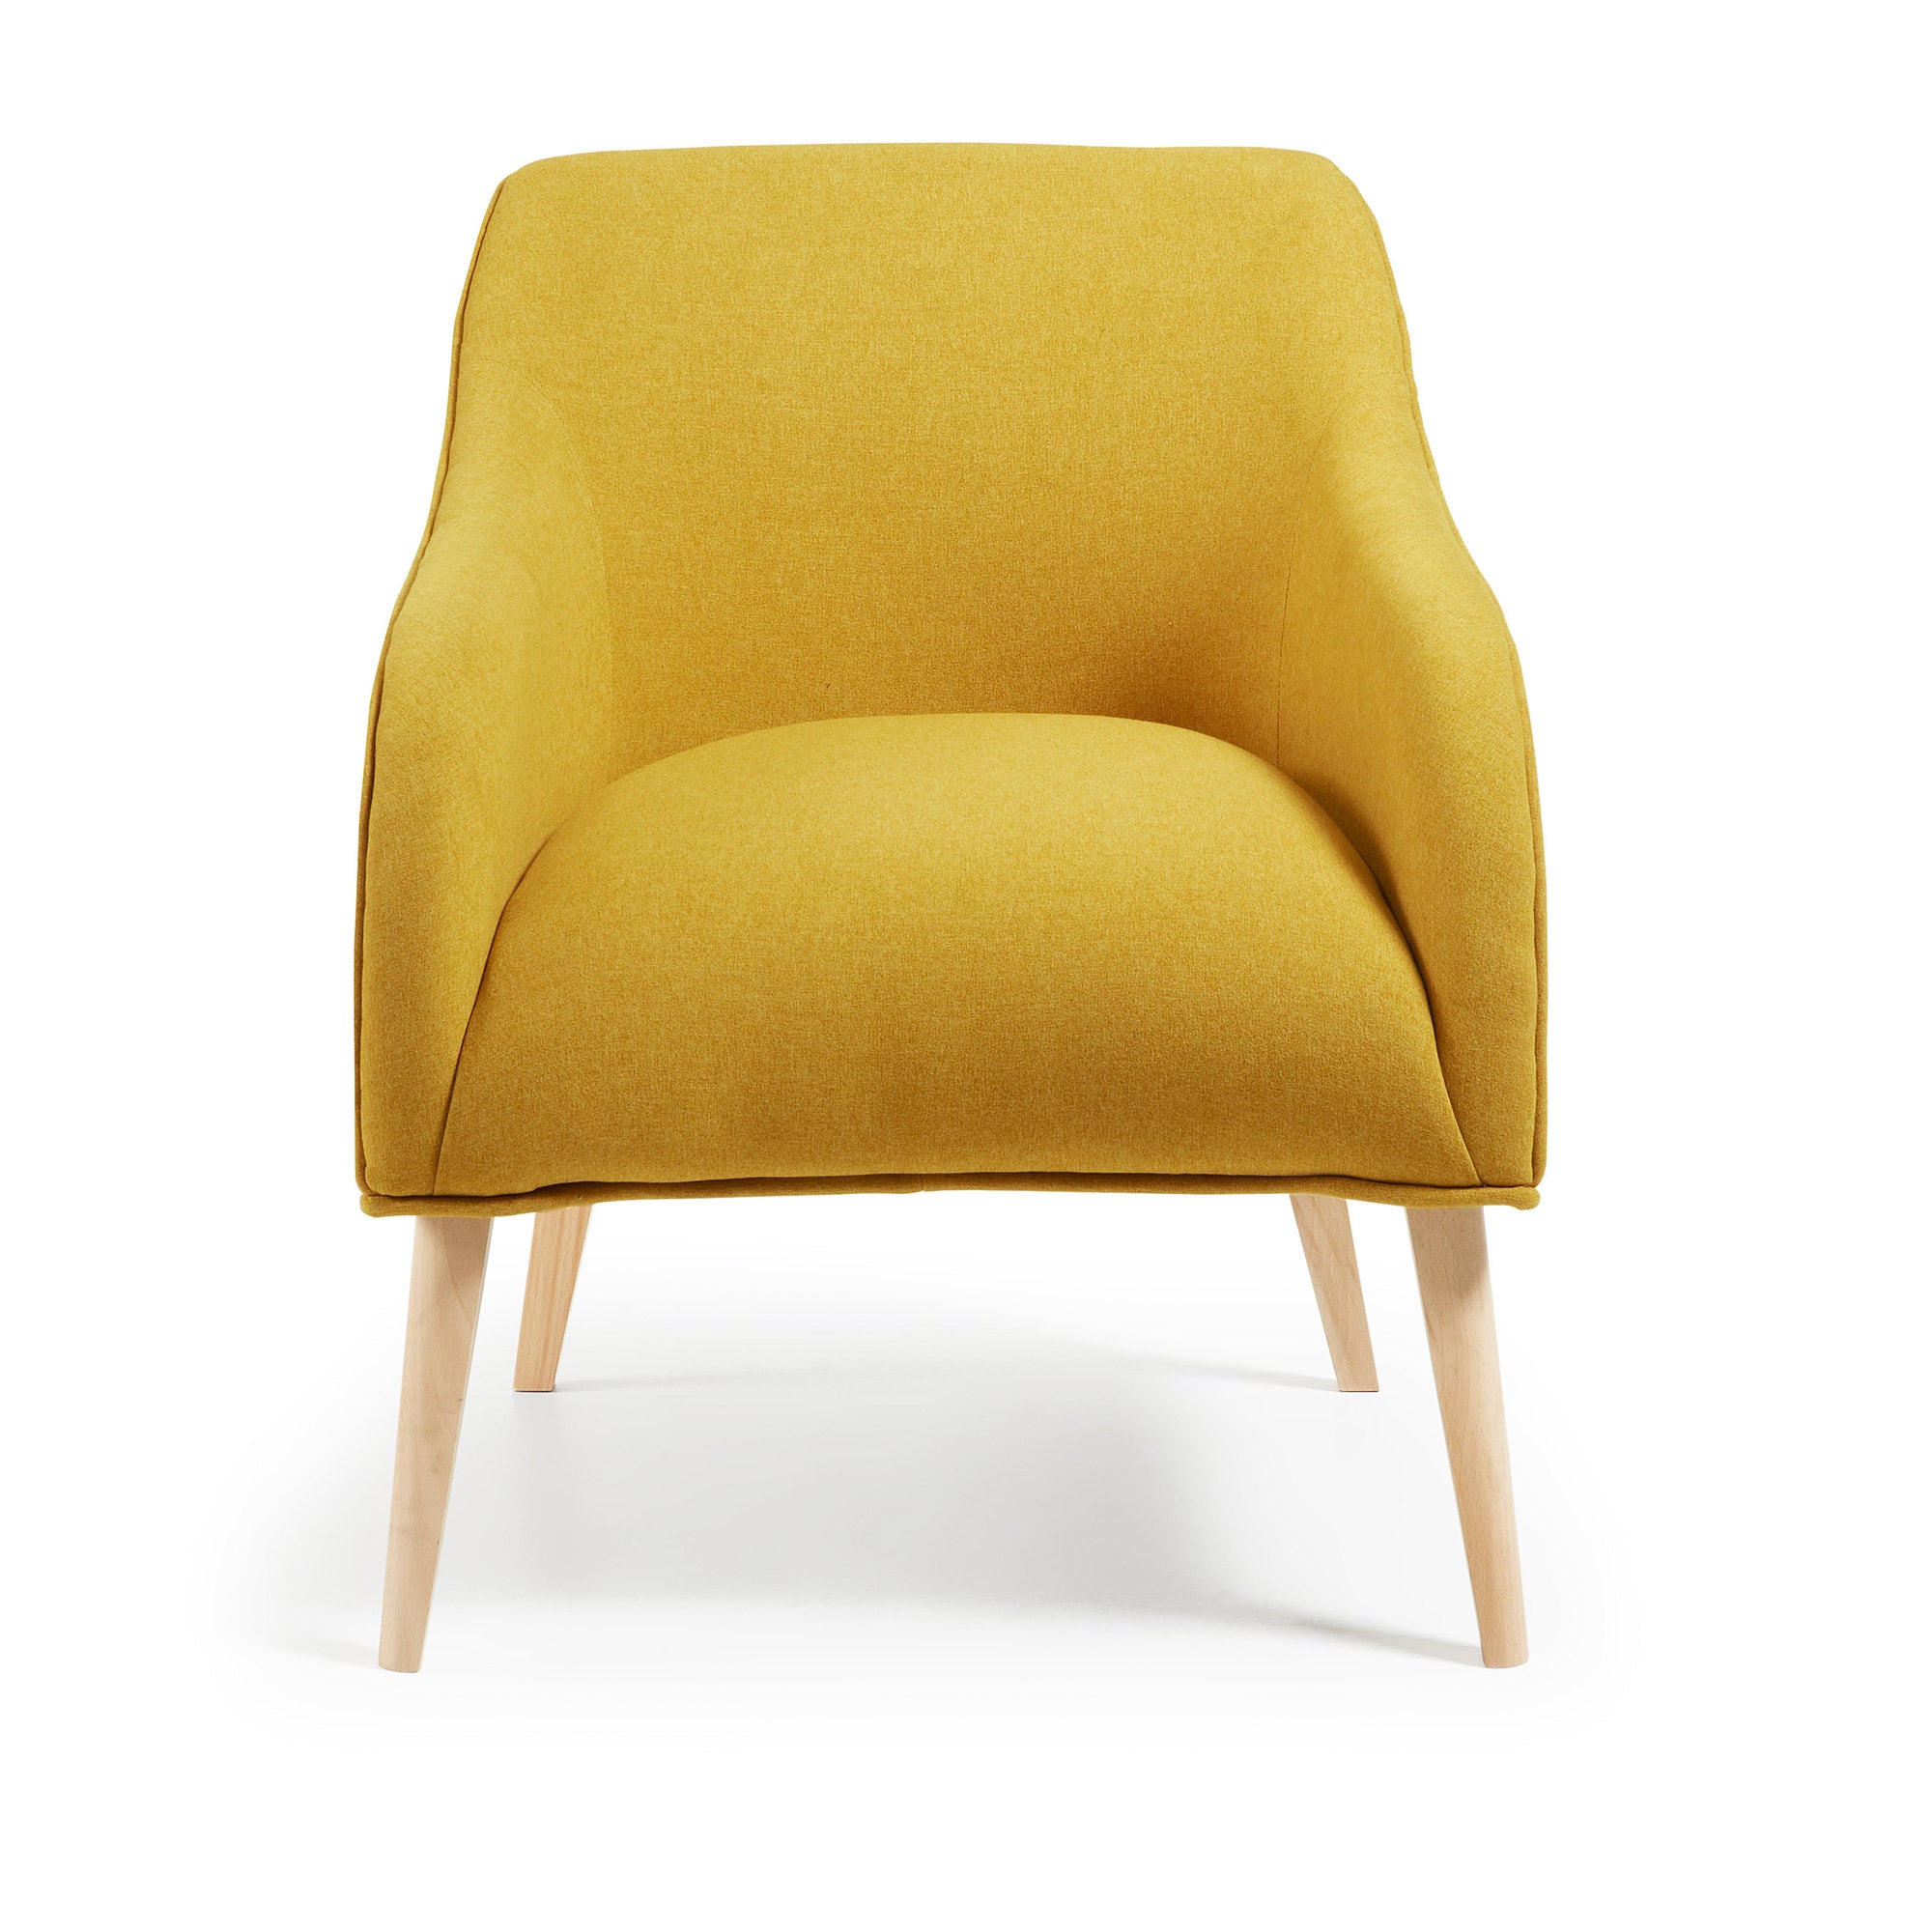 Bobly armchair in mustard with wooden legs with natural finish